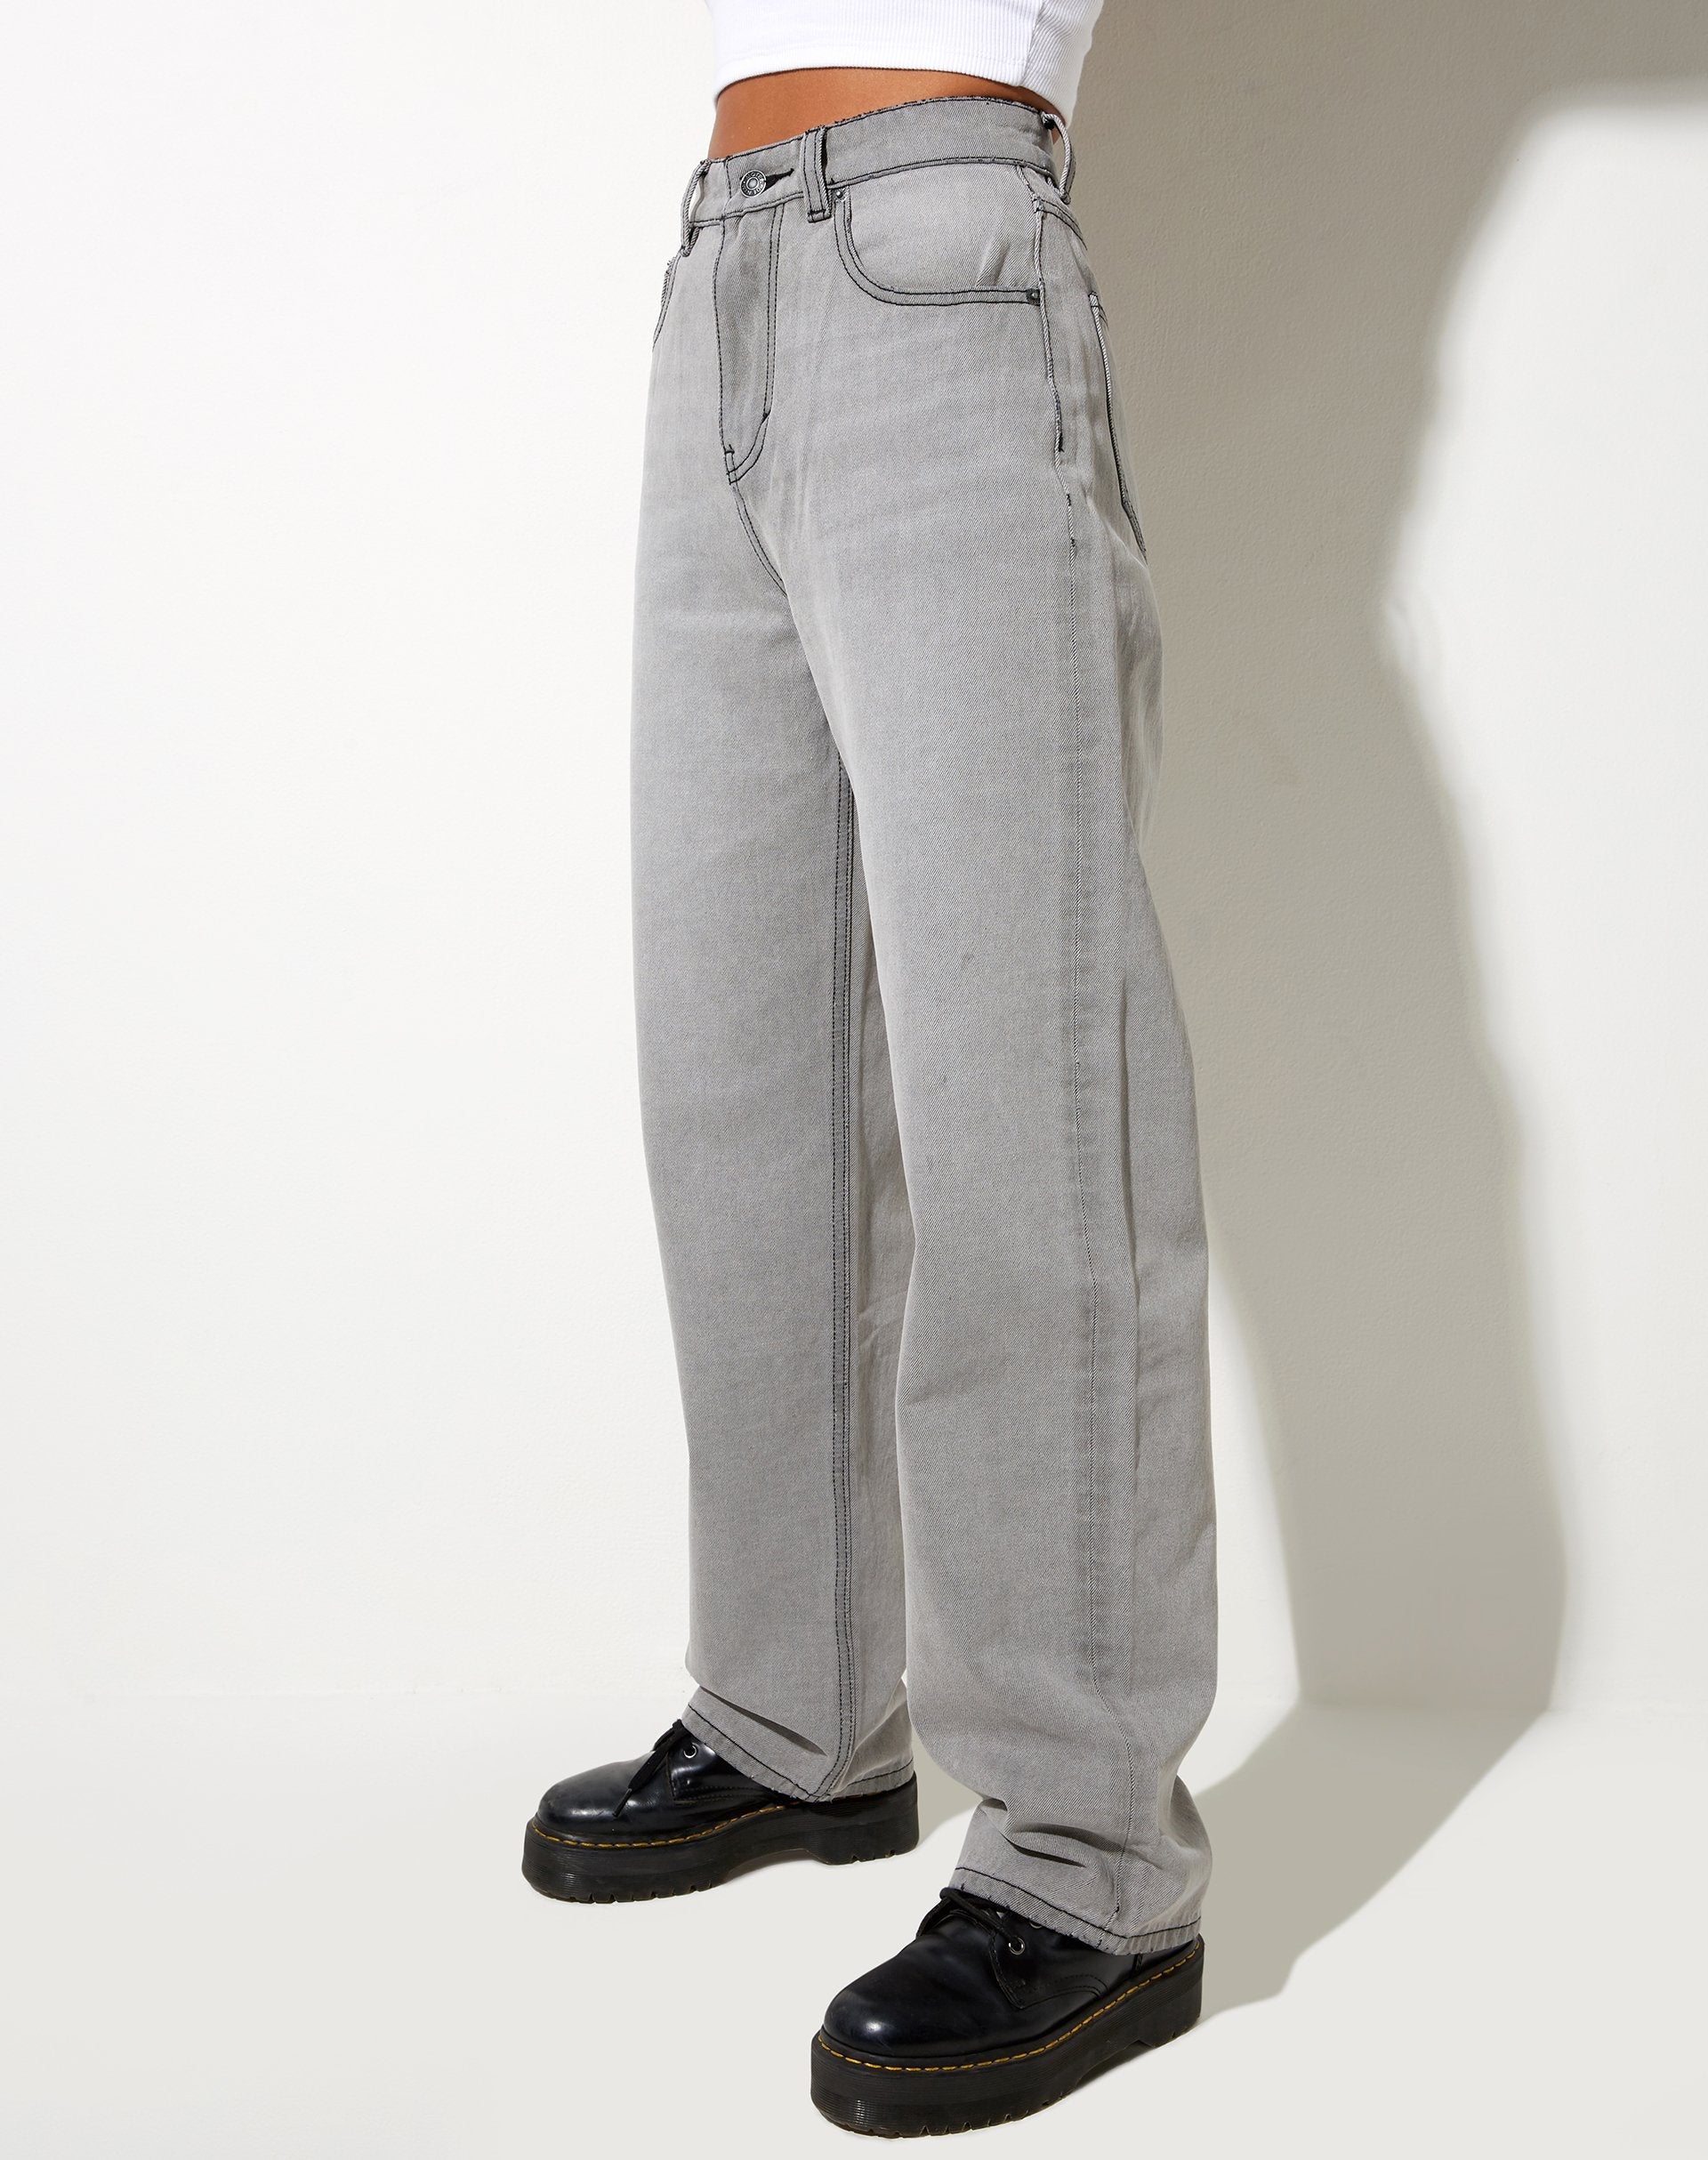 Parallel Jean in Pale Grey Wash